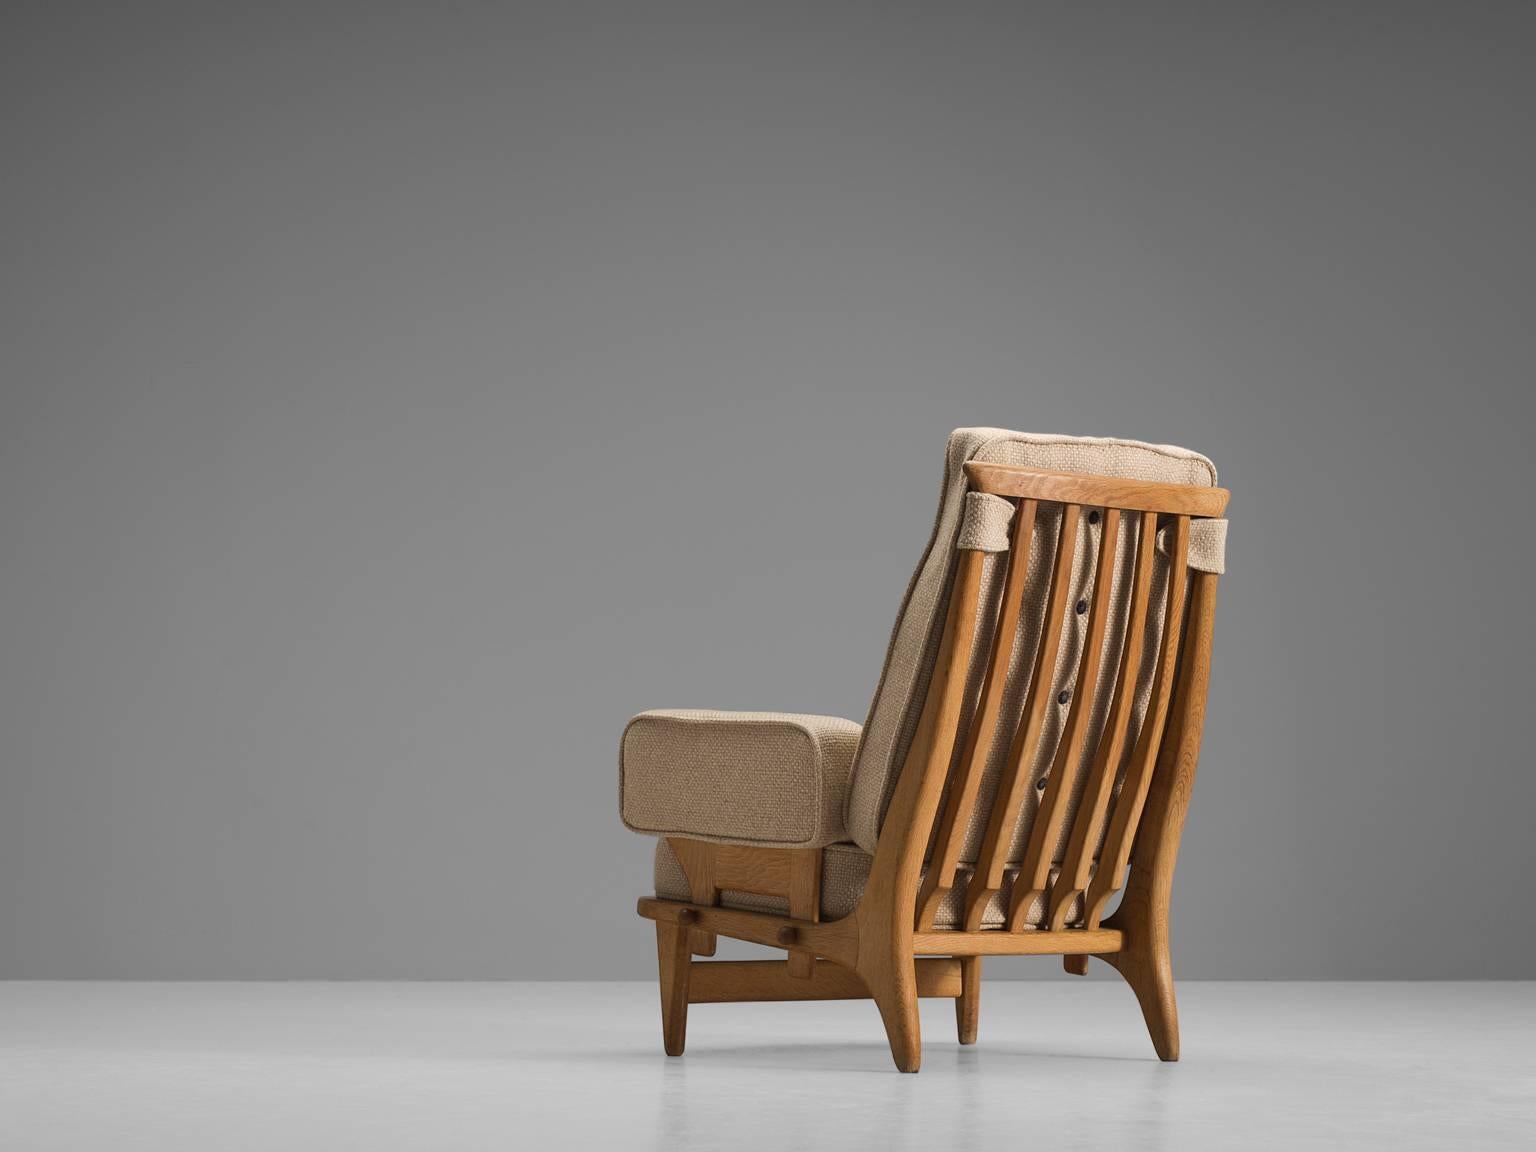 Easy chair, beige fabric, oak, rope, France, 1950s

This sculptural easy chair Guillerme and Chambron are known for their high quality solid oak furniture, from which this is another great example. This comfortable armchair has an interesting open